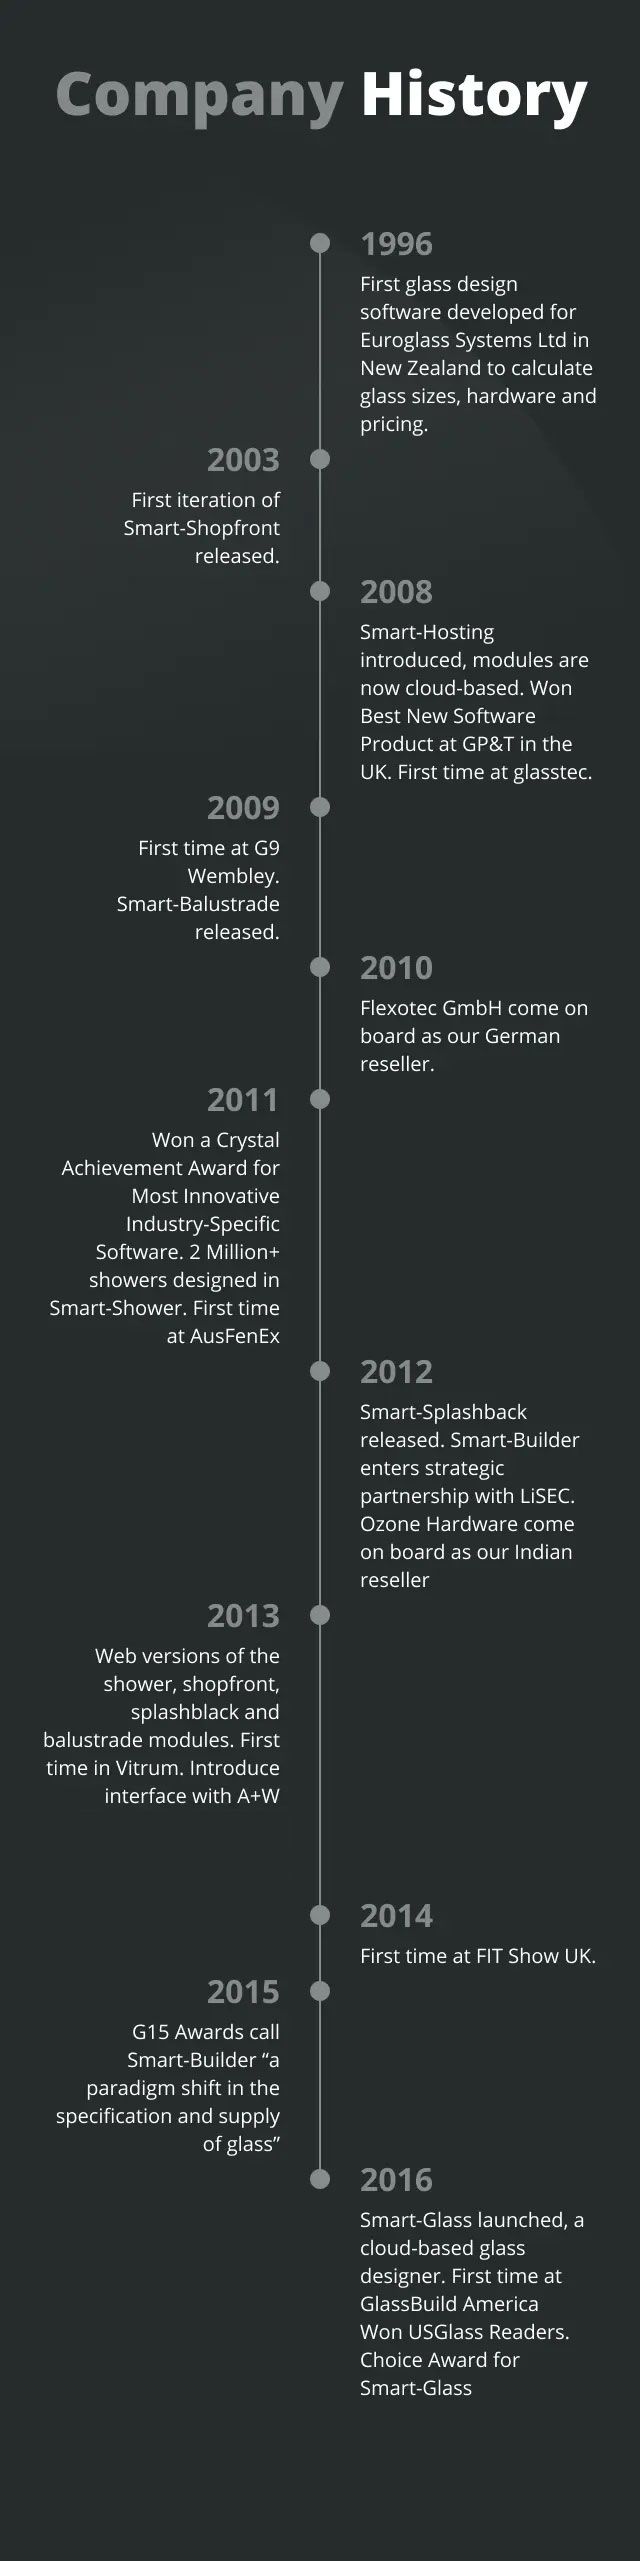 Smart Glazier Software Company History - making great glass software for over 20 years